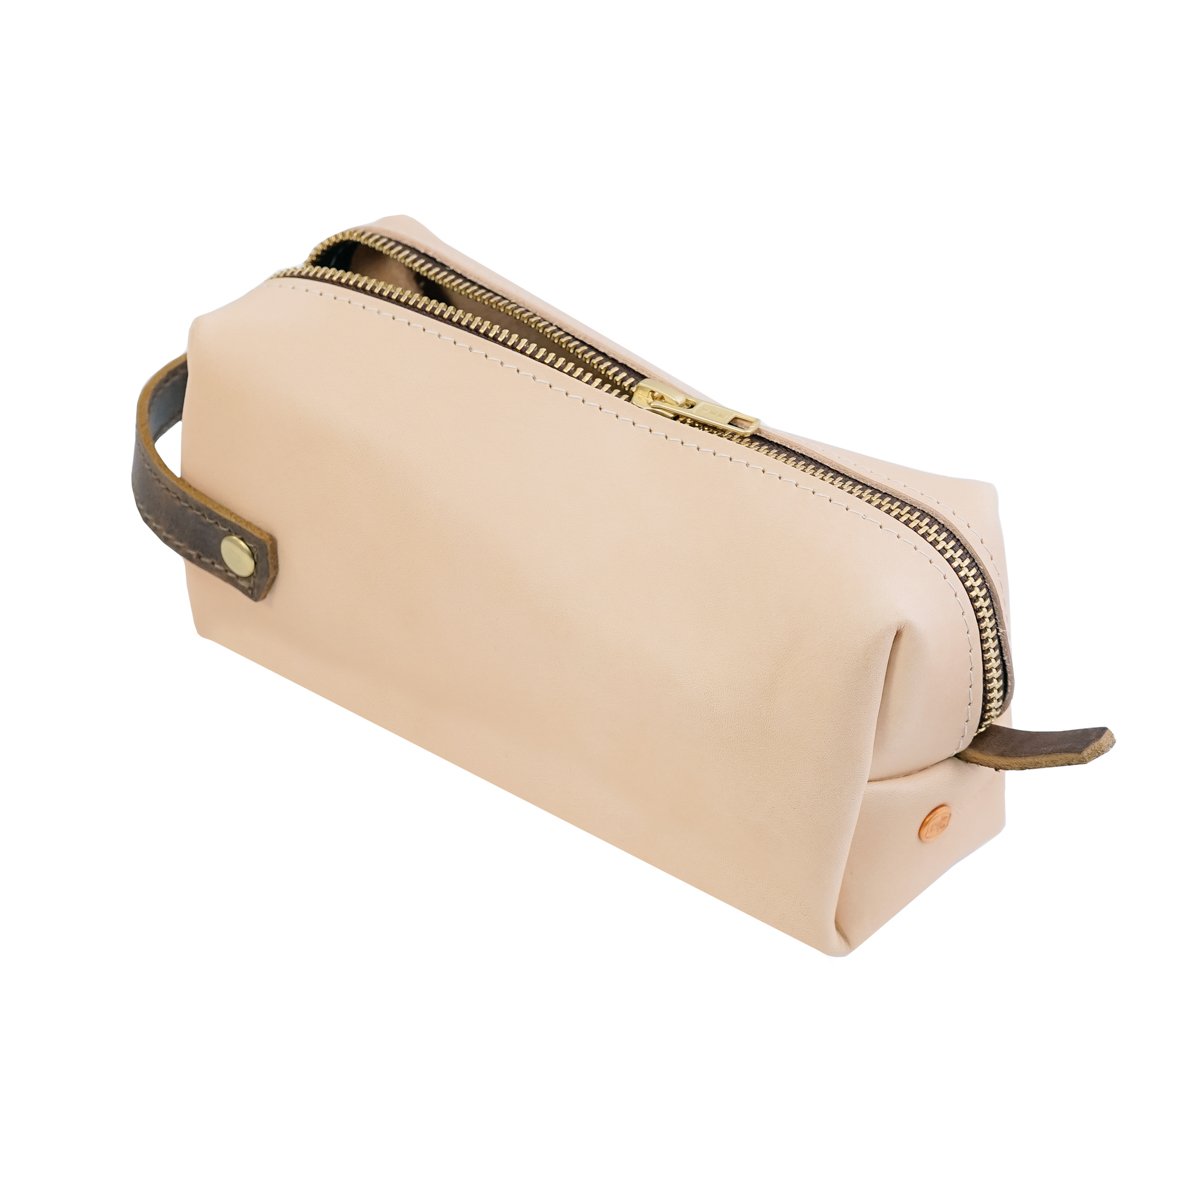 Leather Lay Flat Toiletry Bag – Rustico